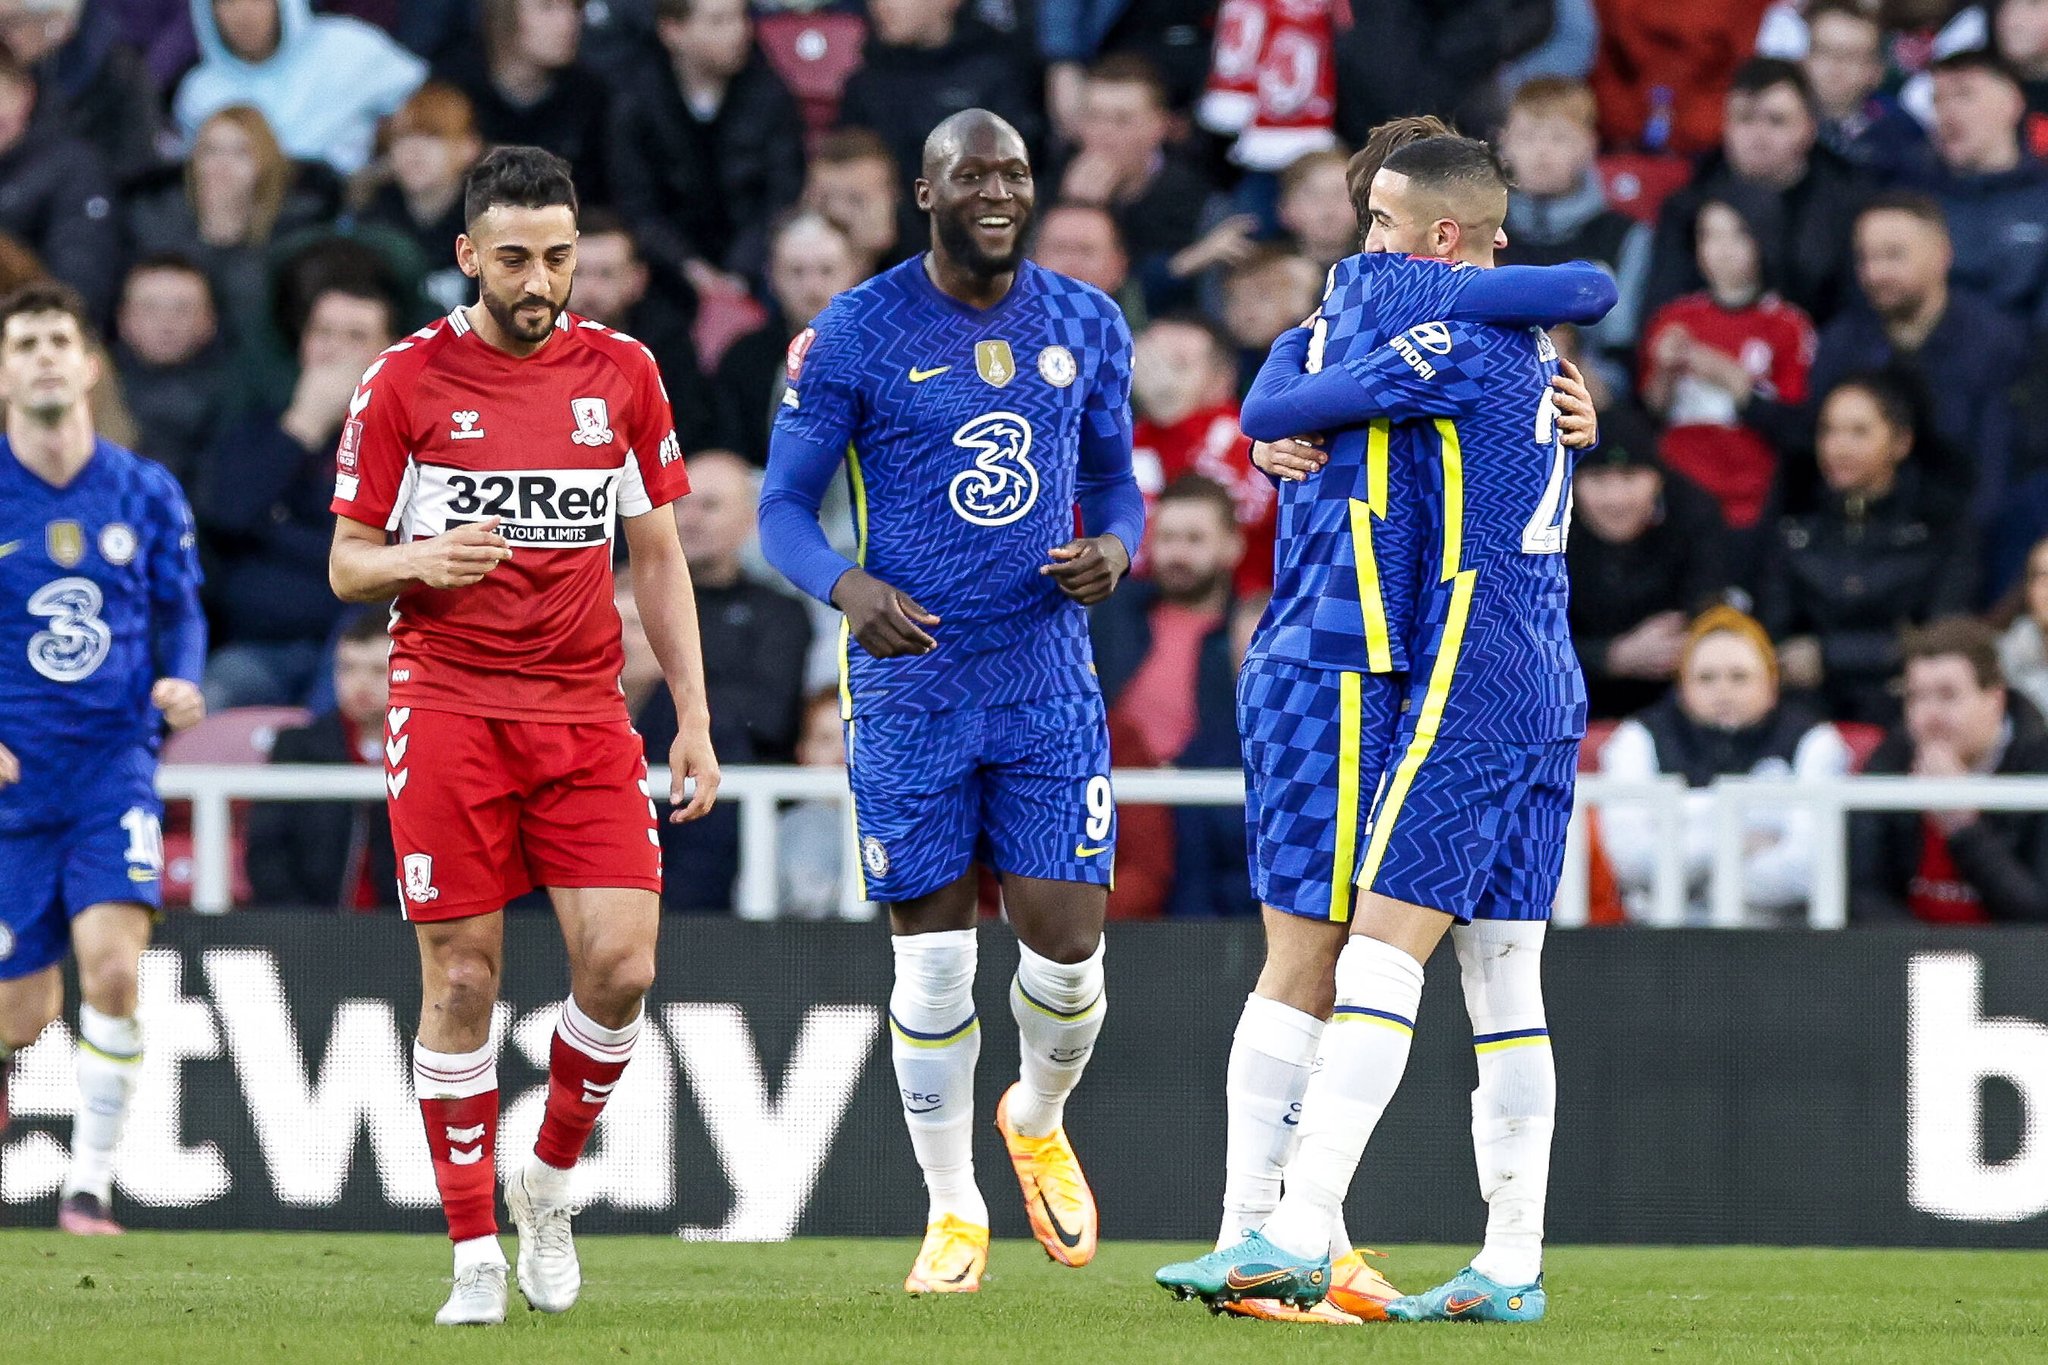 Middlesbrough 0-2 Chelsea LIVE: Chelsea beat Middlesbrough with ease to reach the FA Cup Semi-final courtesy of first-half goals from Romelu Lukaku and Hakim Ziyech